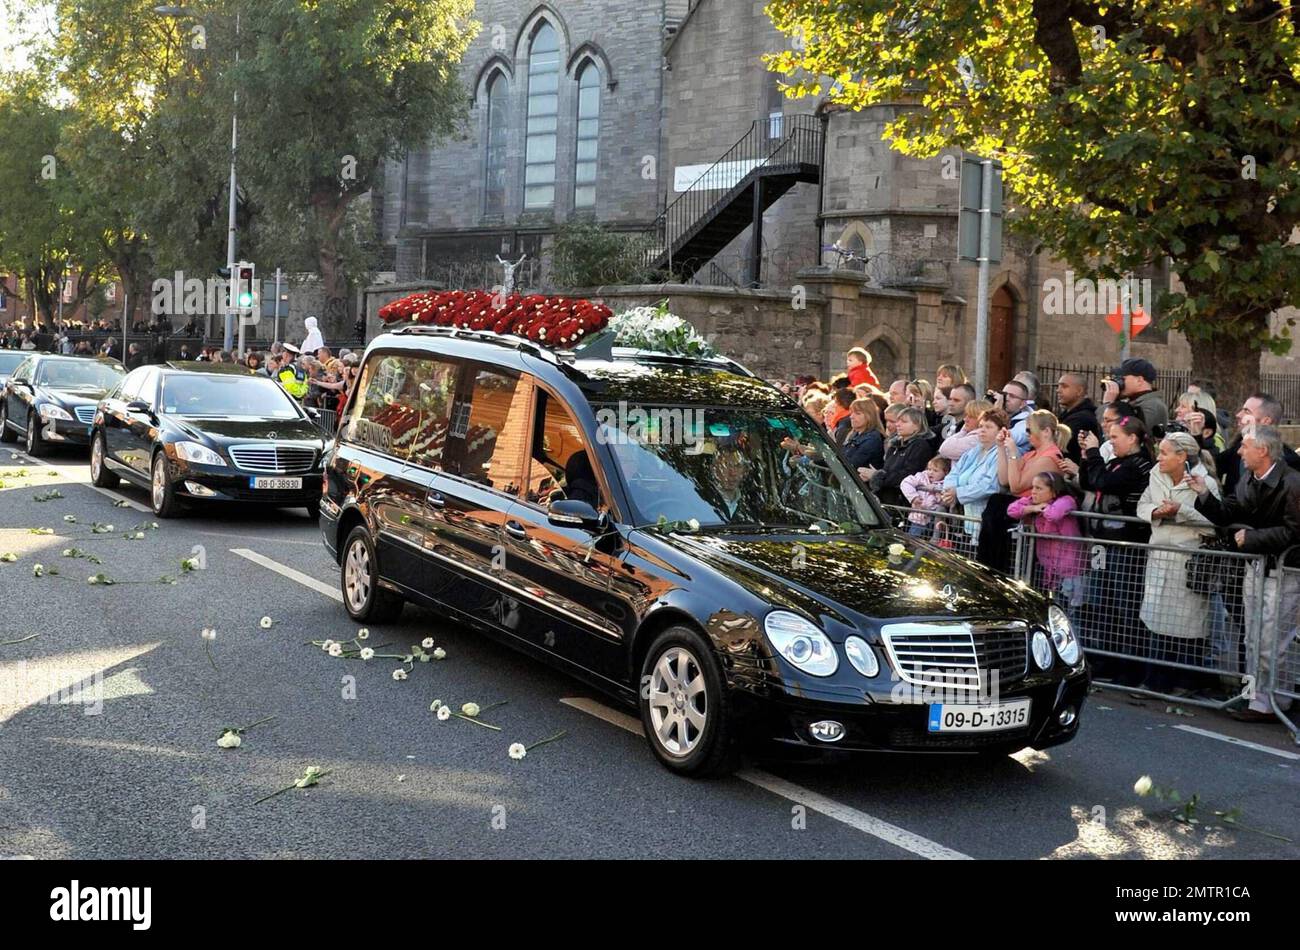 Stephen Gately's funeral procession makes its way through the streets of Dublin after Gately's funeral at St. Laurence O'Toole's Church. The streets are lined with fans and well-wishers who throw white roses at the passing procession. A founding member of Ireland's first boy band, Boyzone, Stephen Gately was found dead at the age of 33 while on holiday in Majorca. It's reported that an autopsy revealed that Stephen died from acute pulmonary oedema, a buildup of fluid in his lungs. Gately was a champion of gay rights after coming out in 1999 and entered into a civil union with Andrew Cowles in Stock Photo